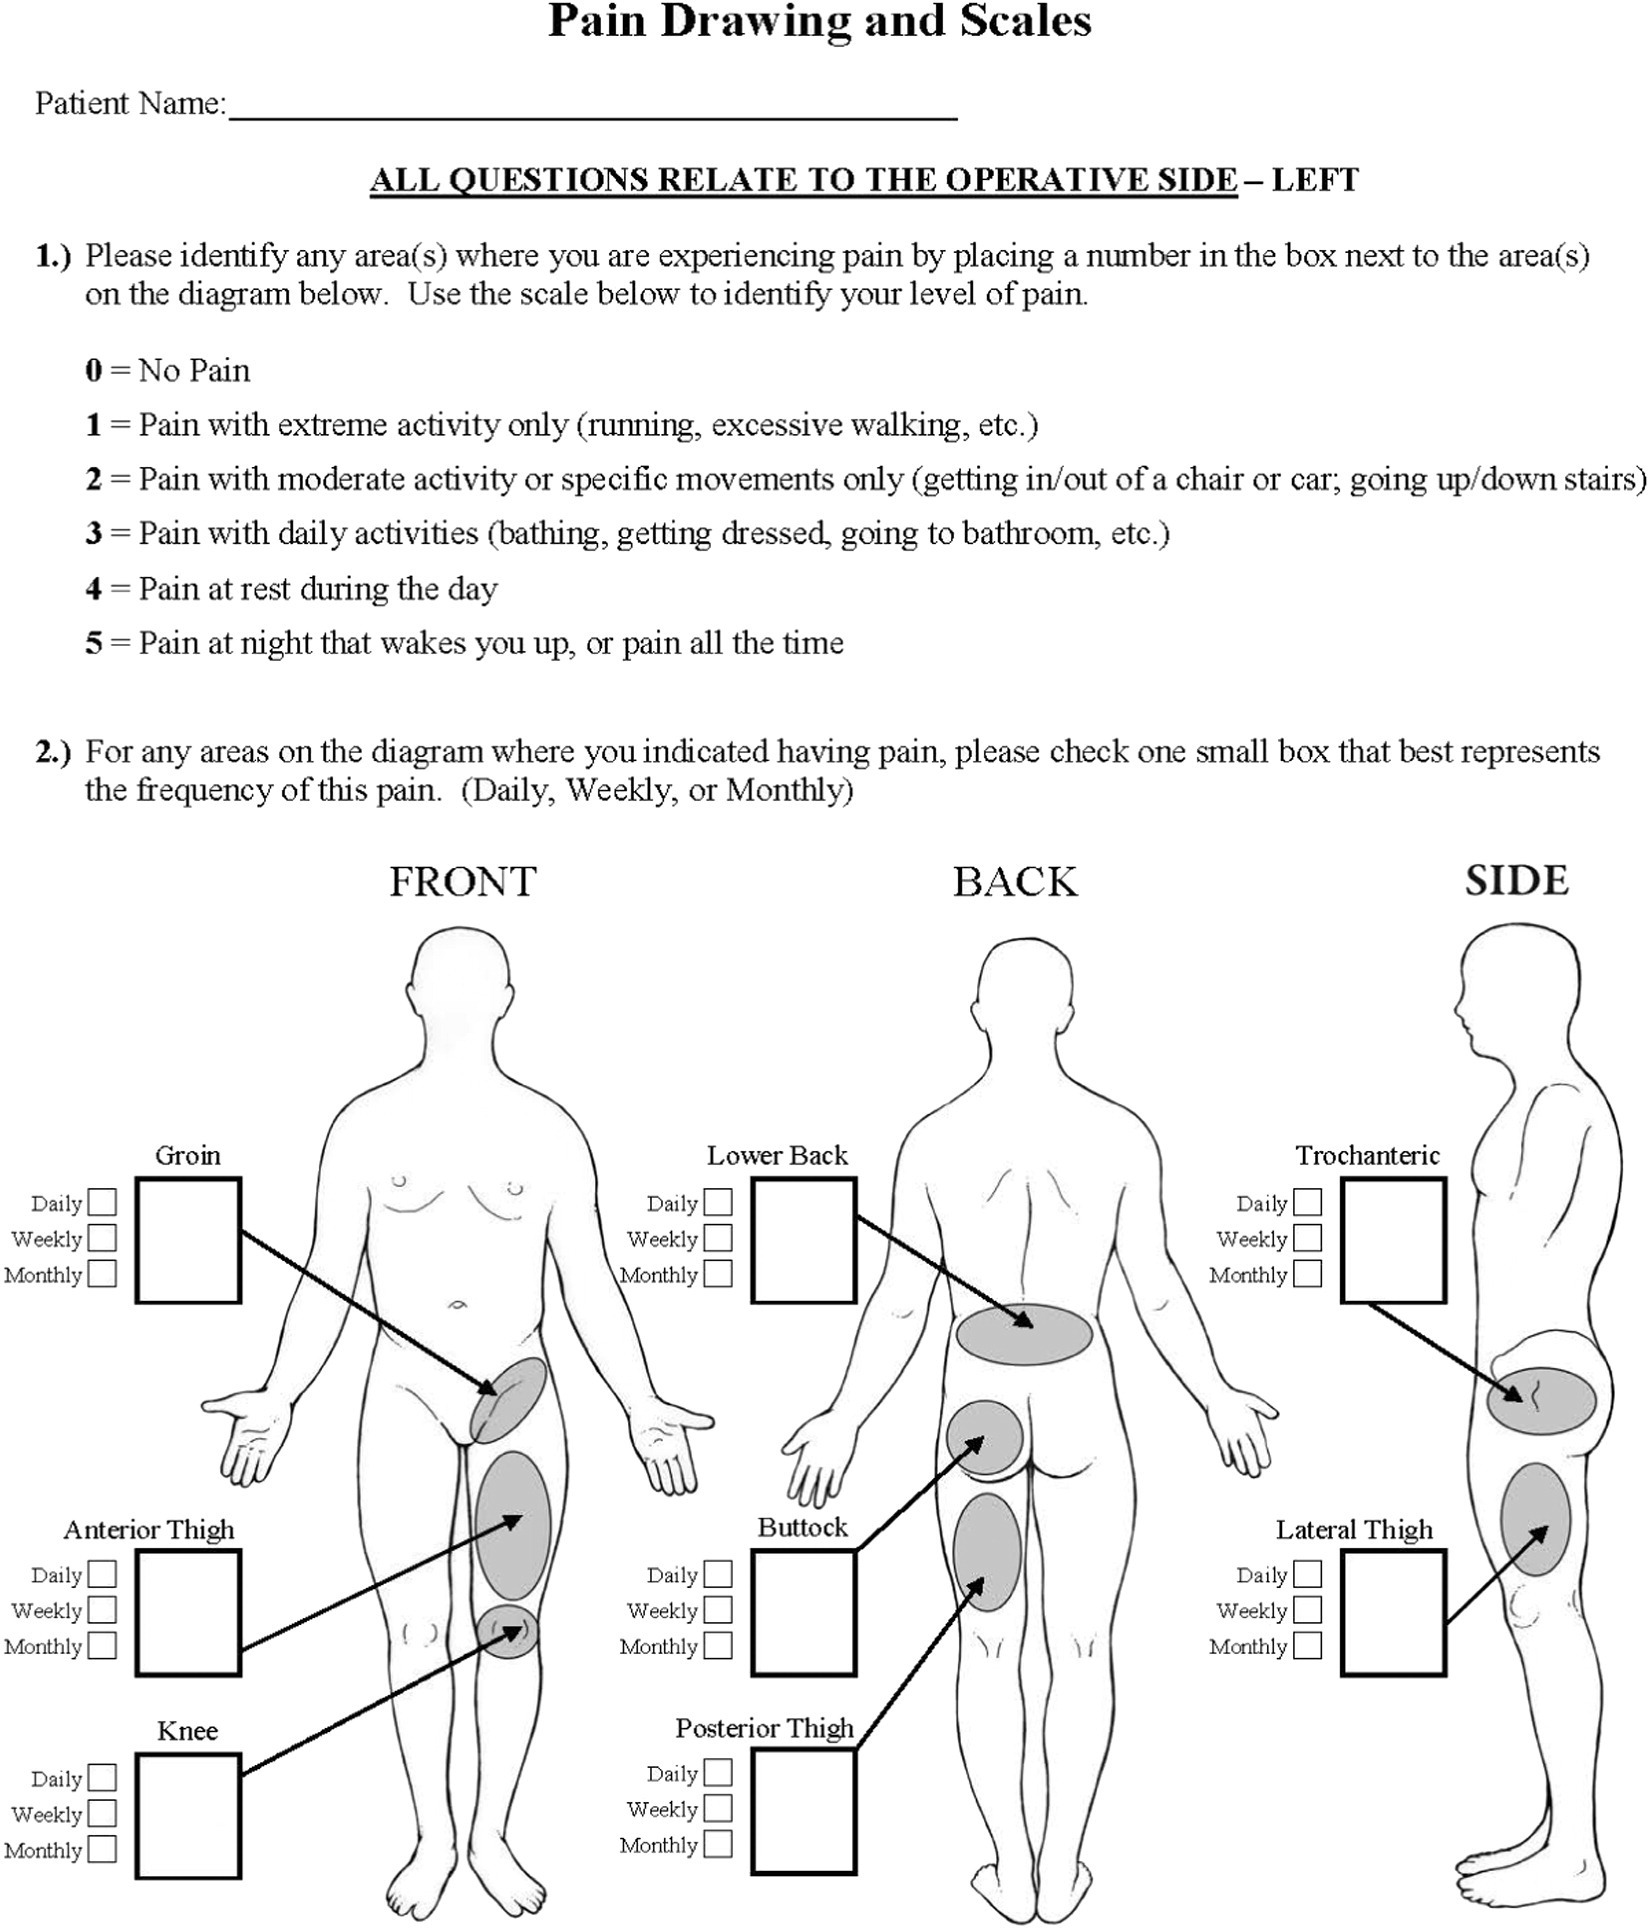 Fig. 2 
            Pain severity and locations drawing included on the hip questionnaire which was sent to potential study participants.
          